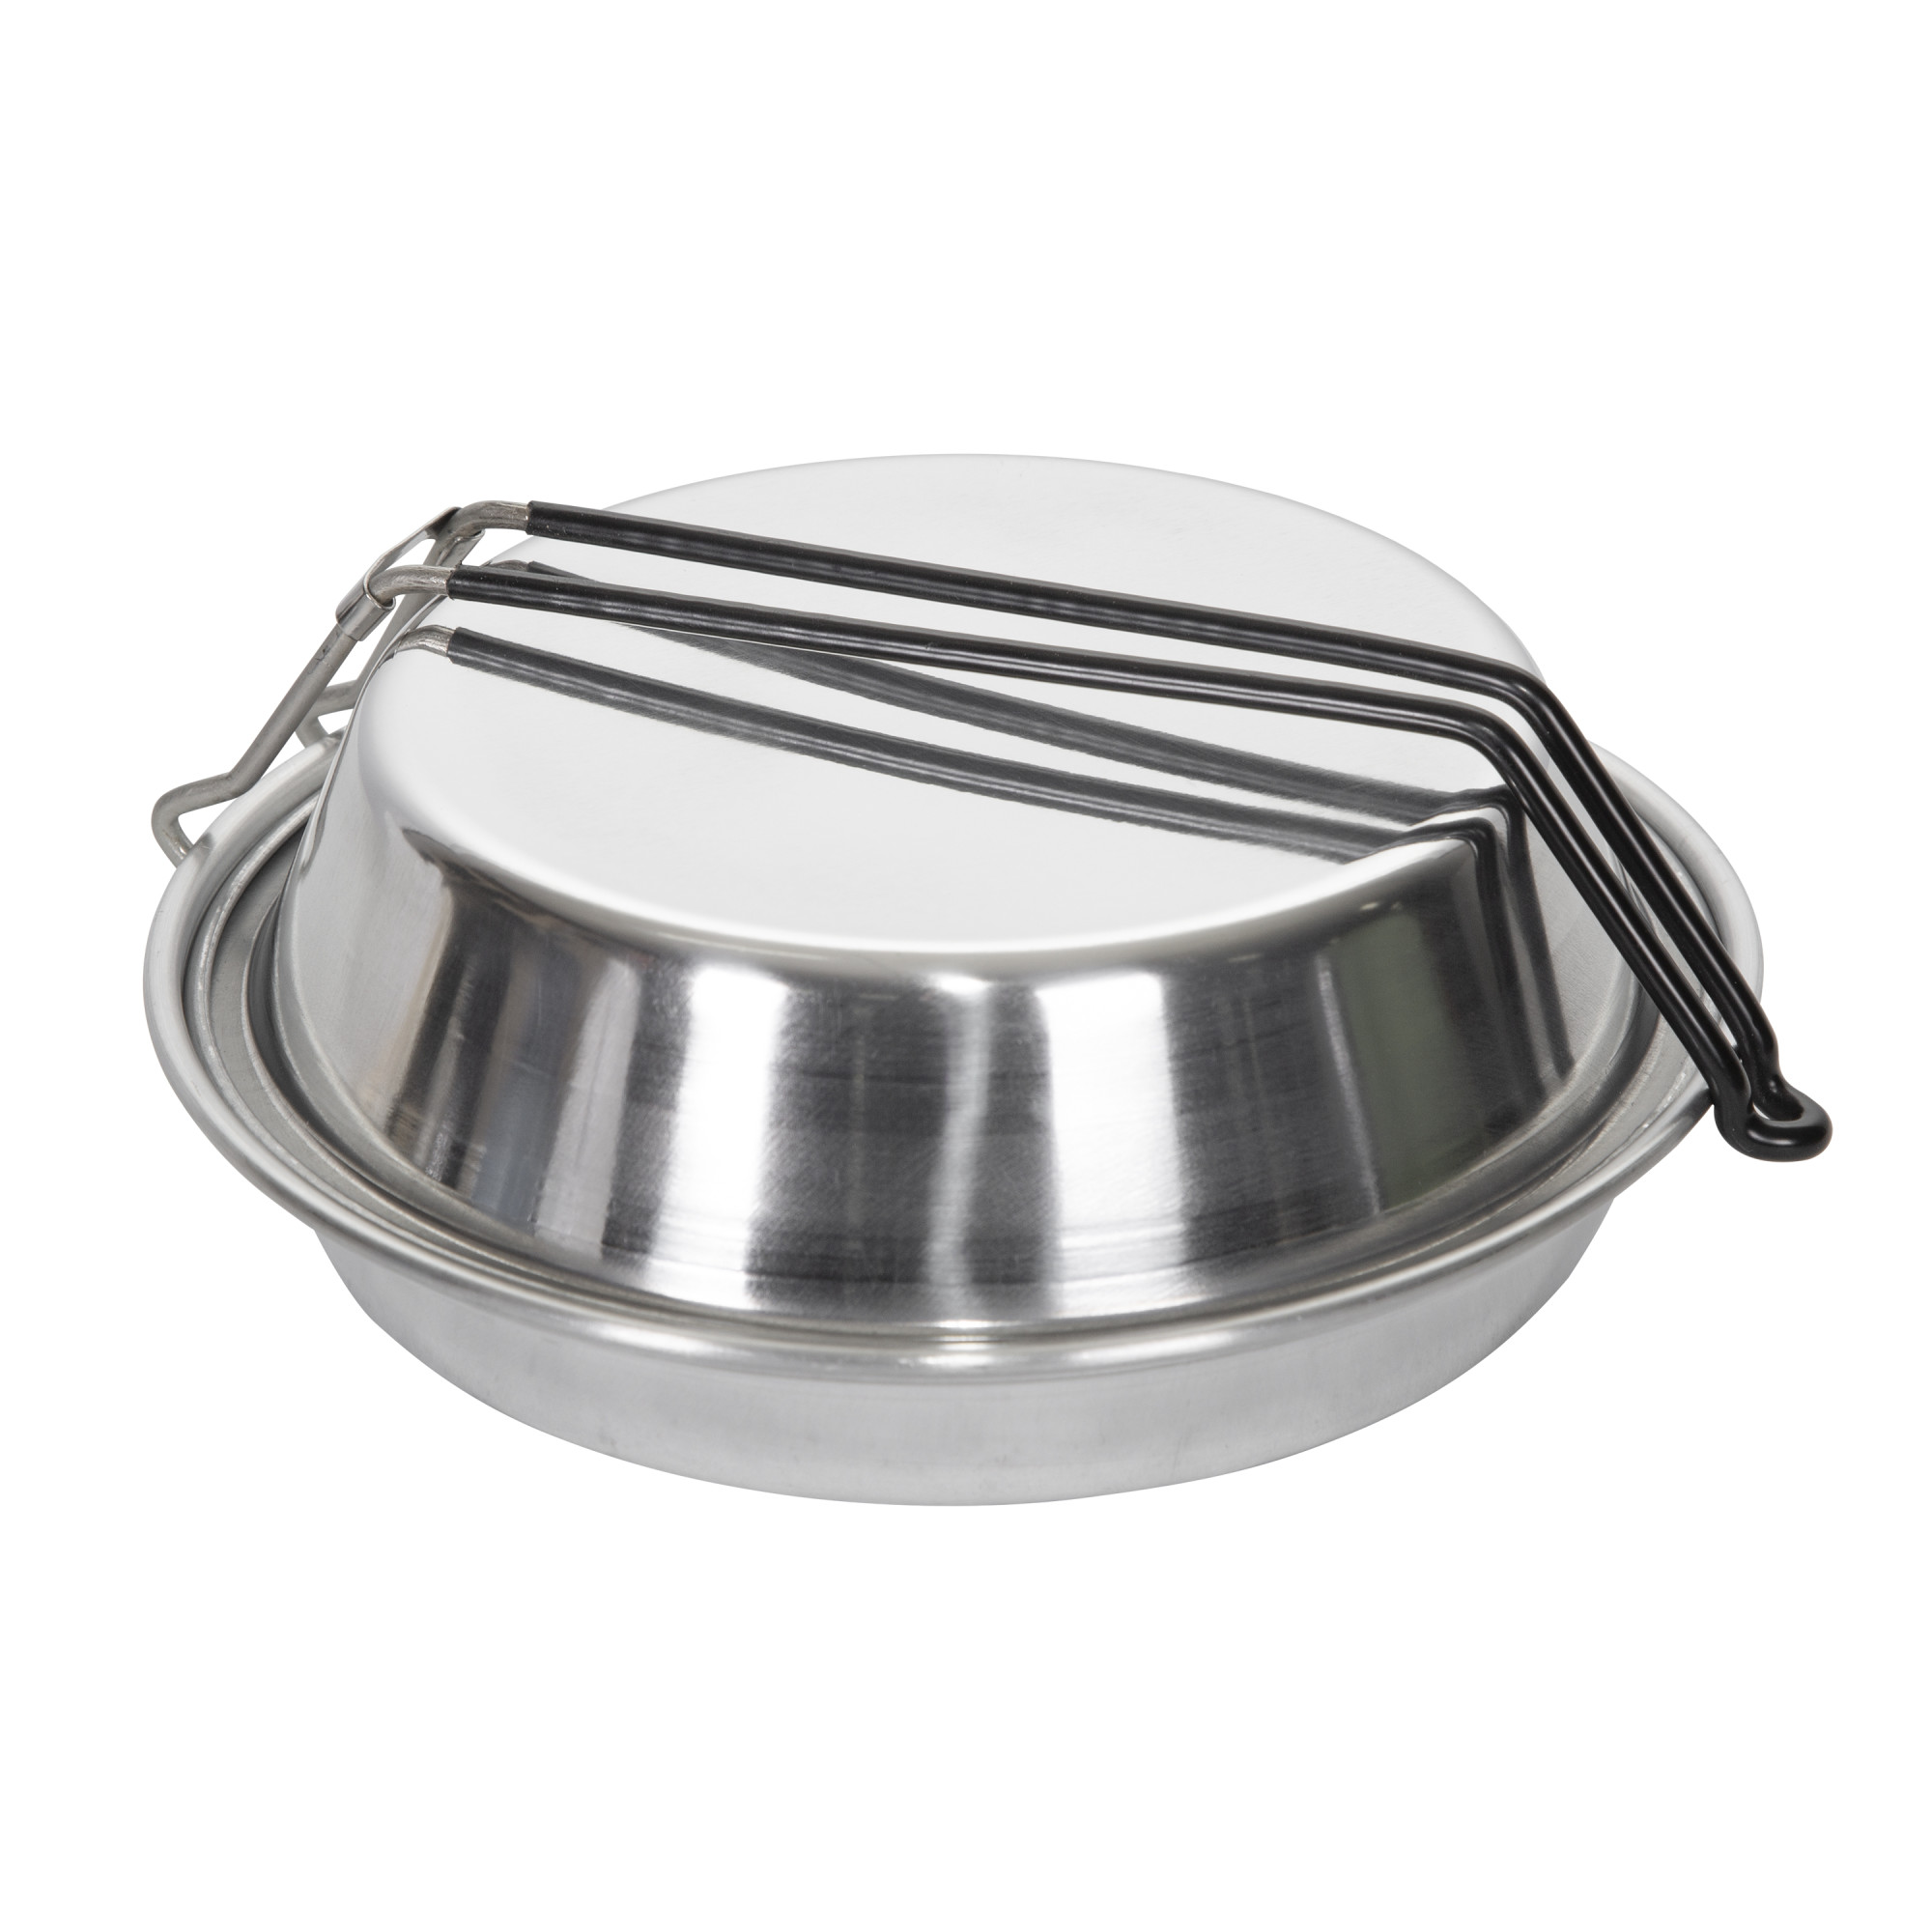 Stansport 1 Piece Aluminum Camping Mess Kit - image 2 of 10